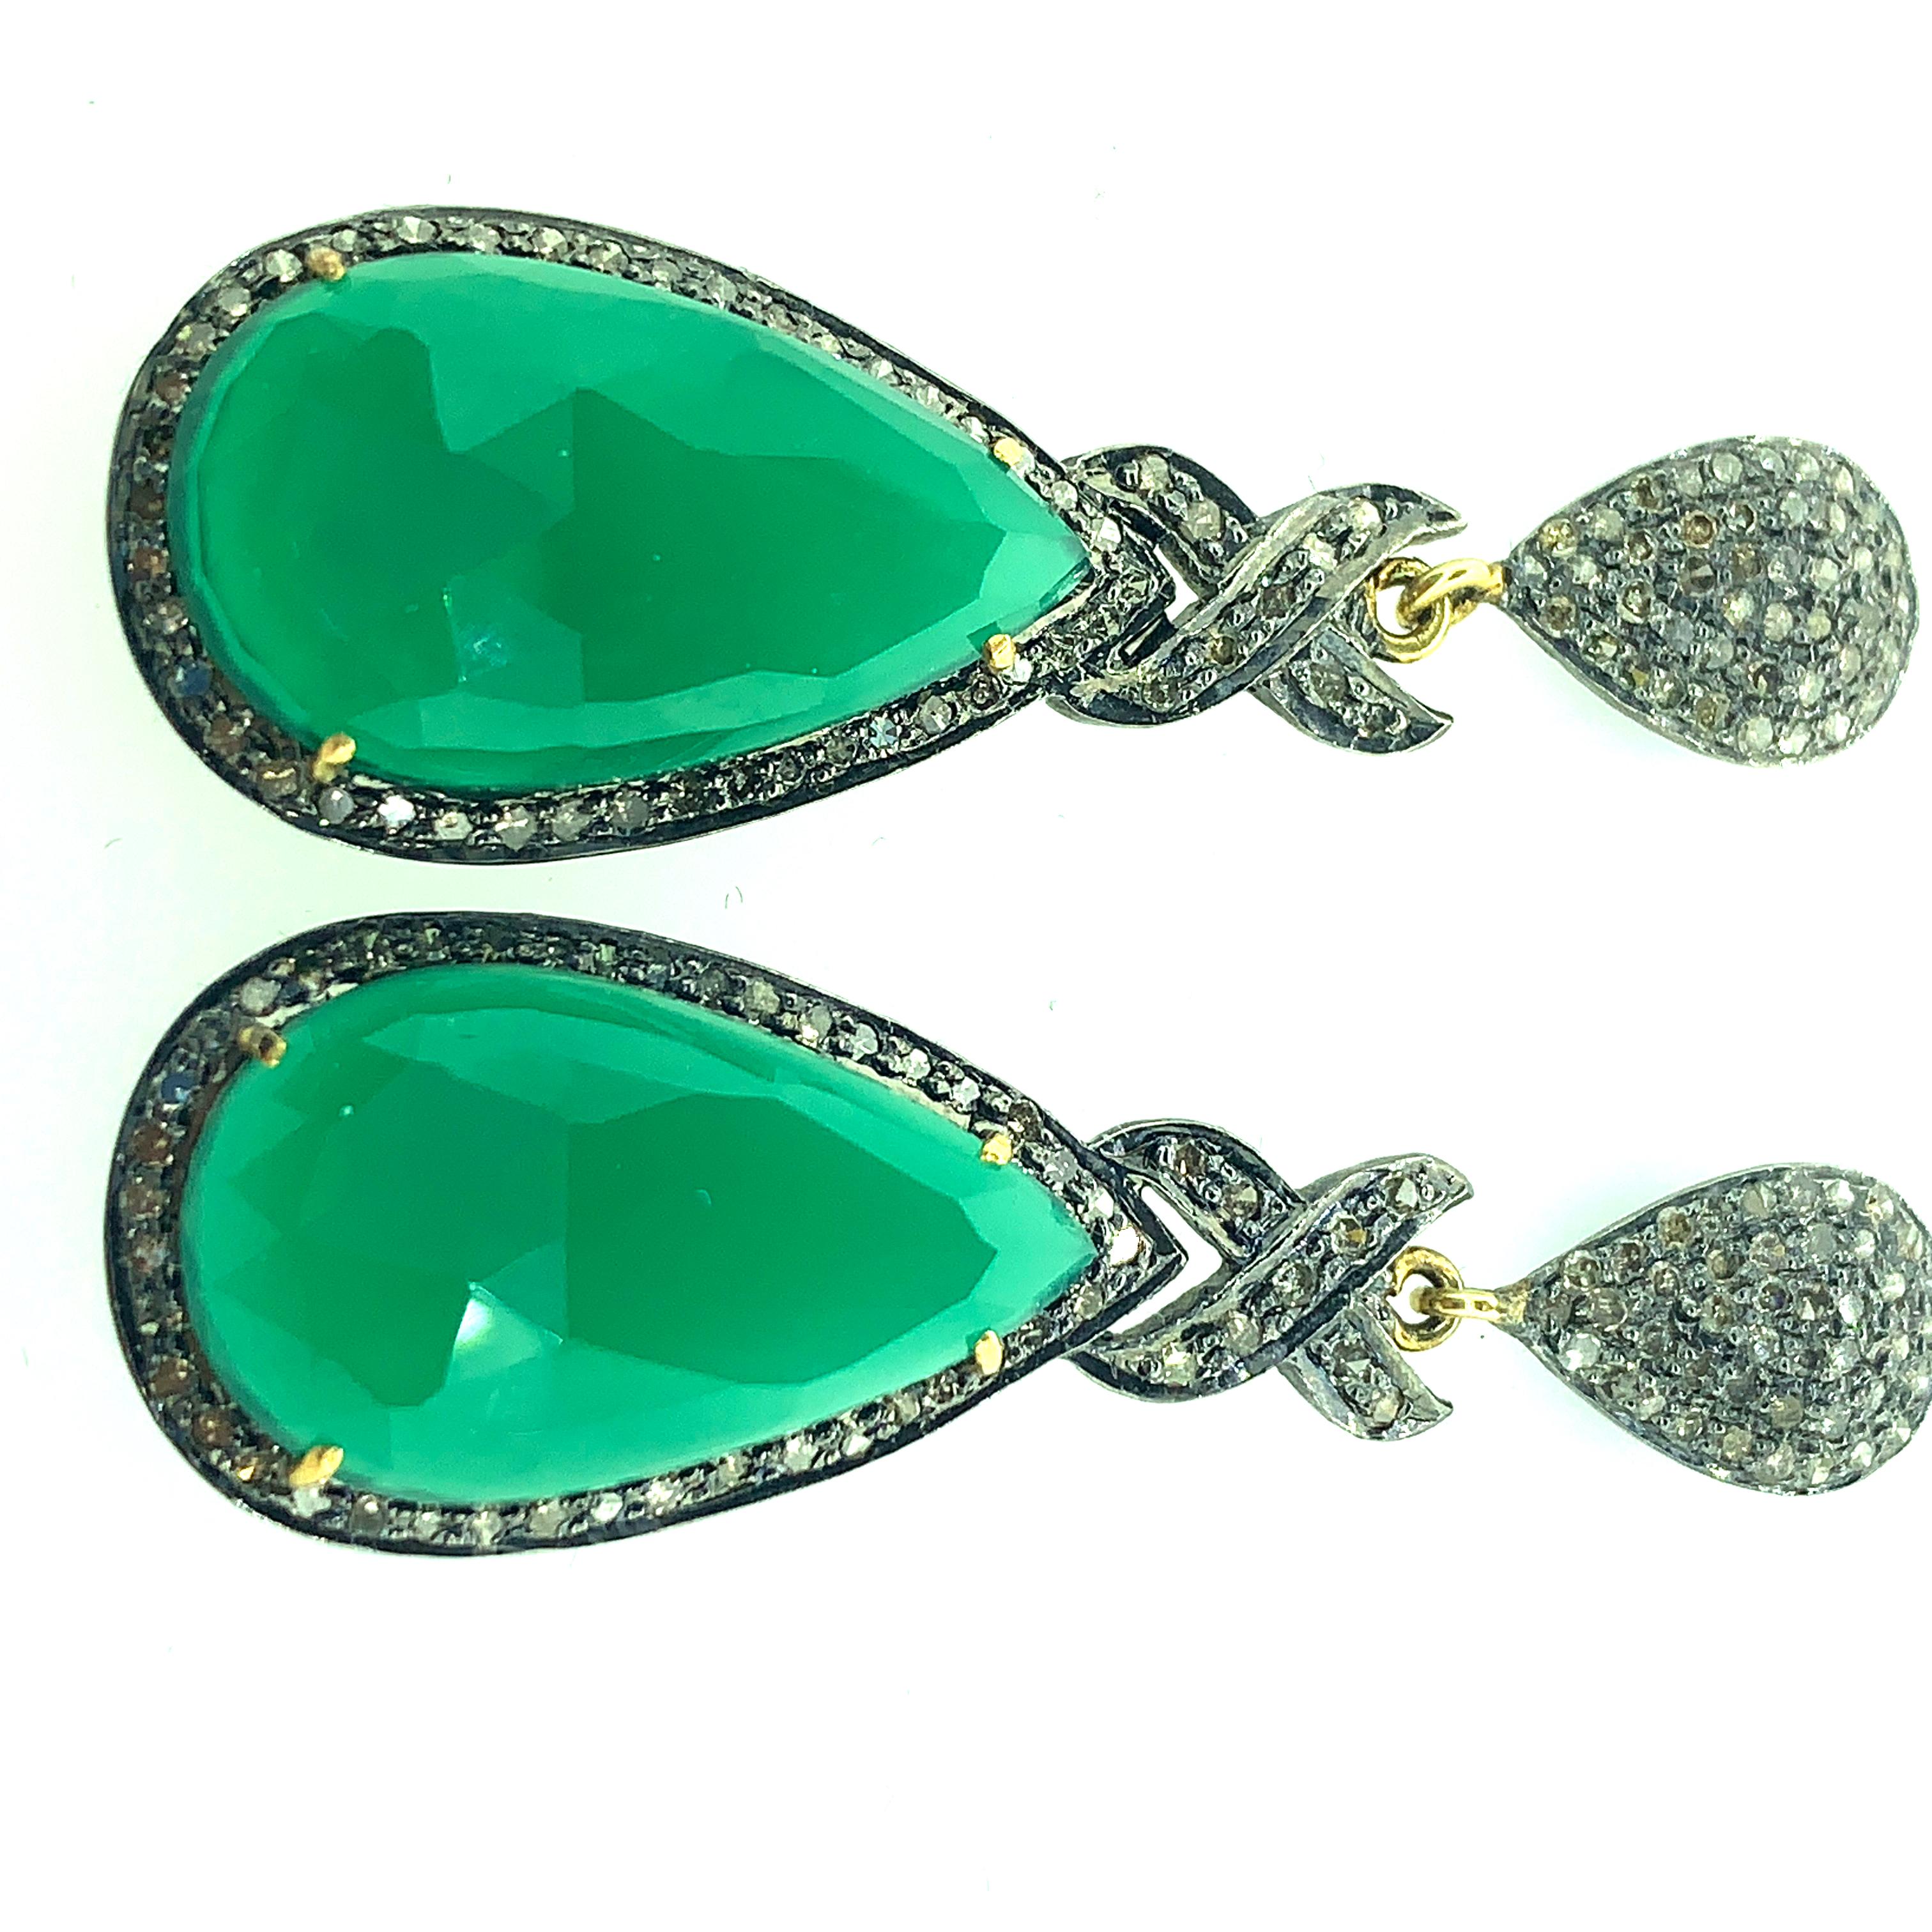 Beautifully crafted in Sterling, silver this green onyx earrings are sure to draw the eyes. This pear- shaped green onyx , set in prongs within a glistening champagne diamond halo, fascinates with its intense color. X- cross pattern and drop pave